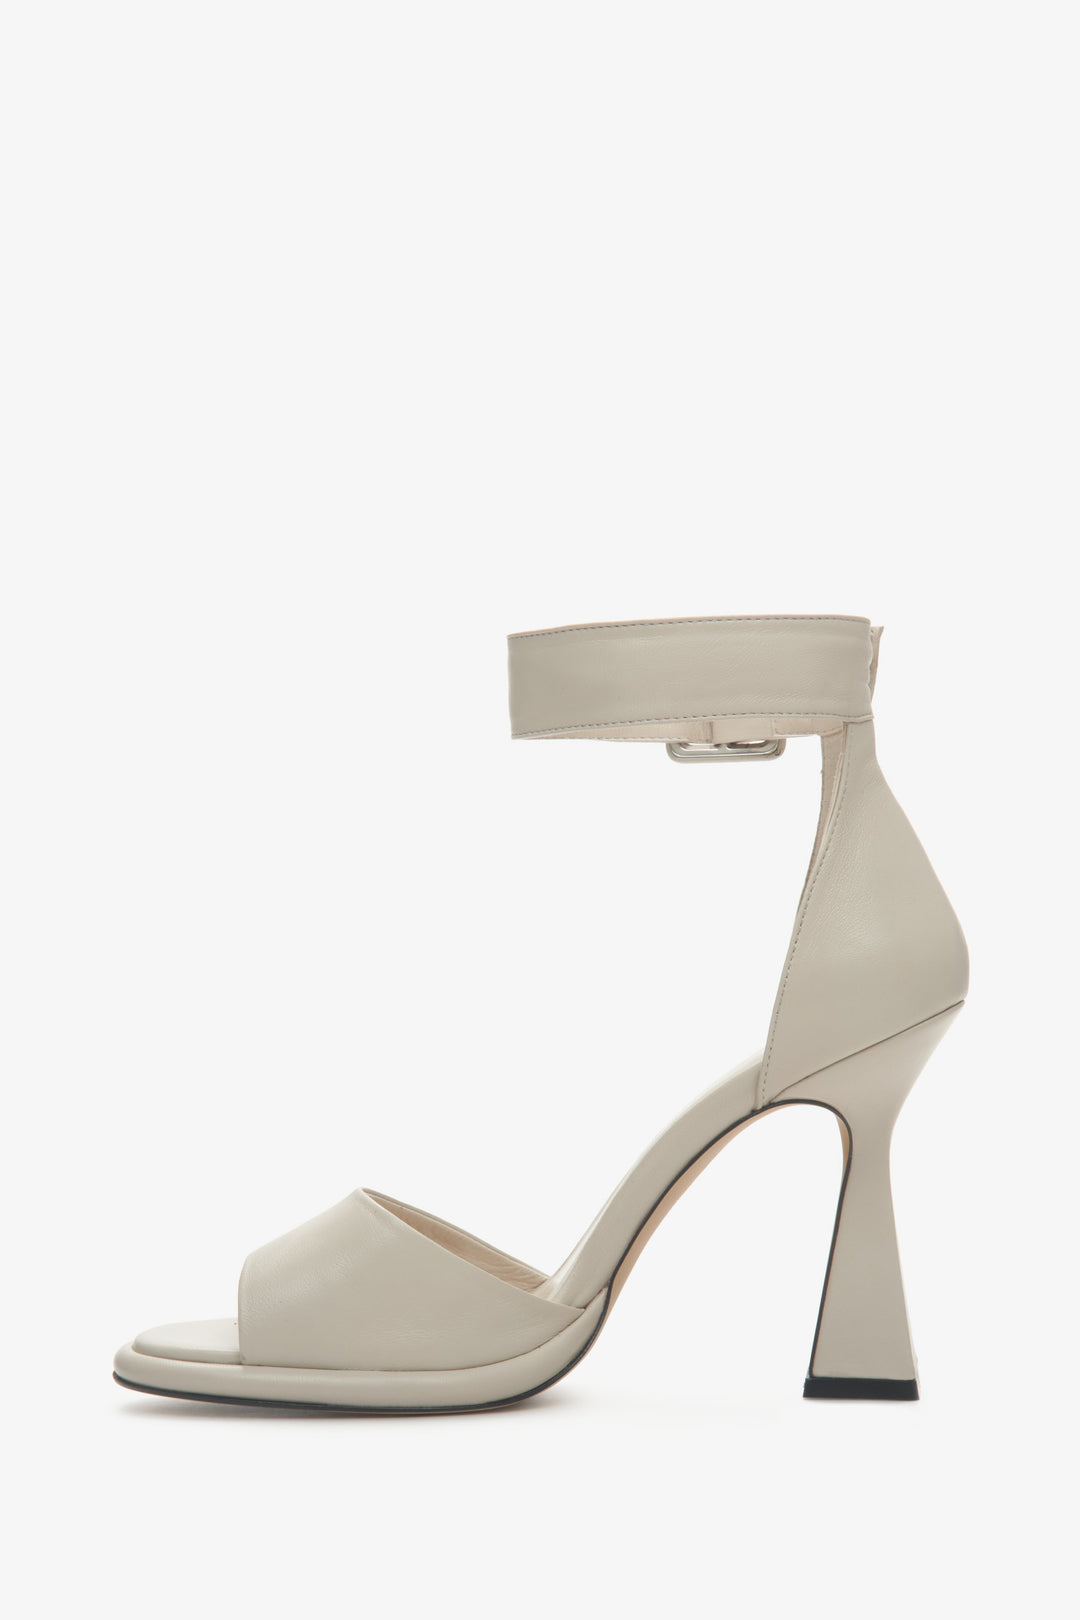 Women's Estro natural leather sandals fastened at the ankle with a funnel heel, beige color.